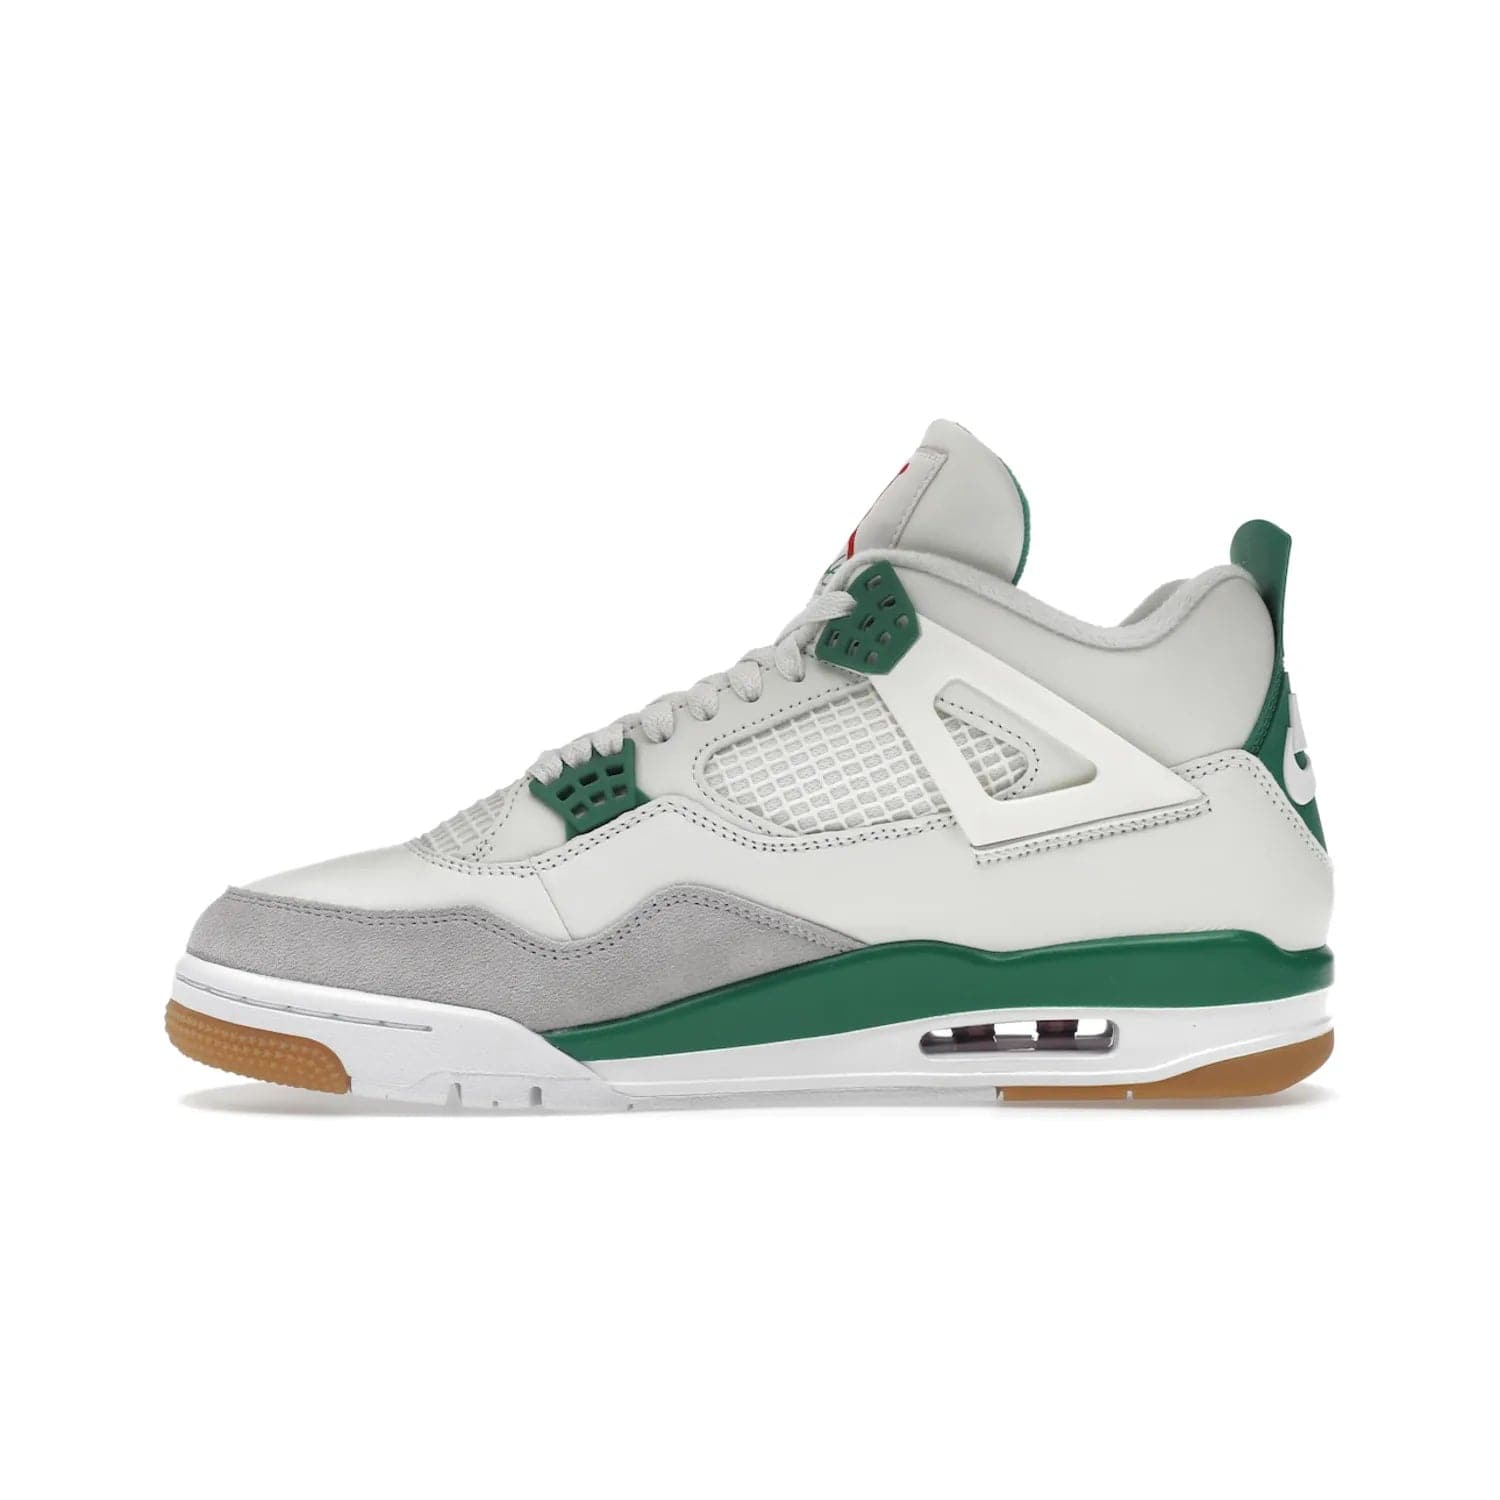 Jordan 4 Retro SB Pine Green - Image 19 - Only at www.BallersClubKickz.com - A white leather upper combined with a Neutral Grey suede mudguard gives this limited Air Jordan 4 Retro SB Pine Green sneaker its unmistakable style. Released March 20, 2023, the Jordan 4 Retro SB features a white and Pine Green midsole plus a red air unit with a gum outsole for grip. The perfect blend of Nike SB skateboarding and Jordan 4 classic design.